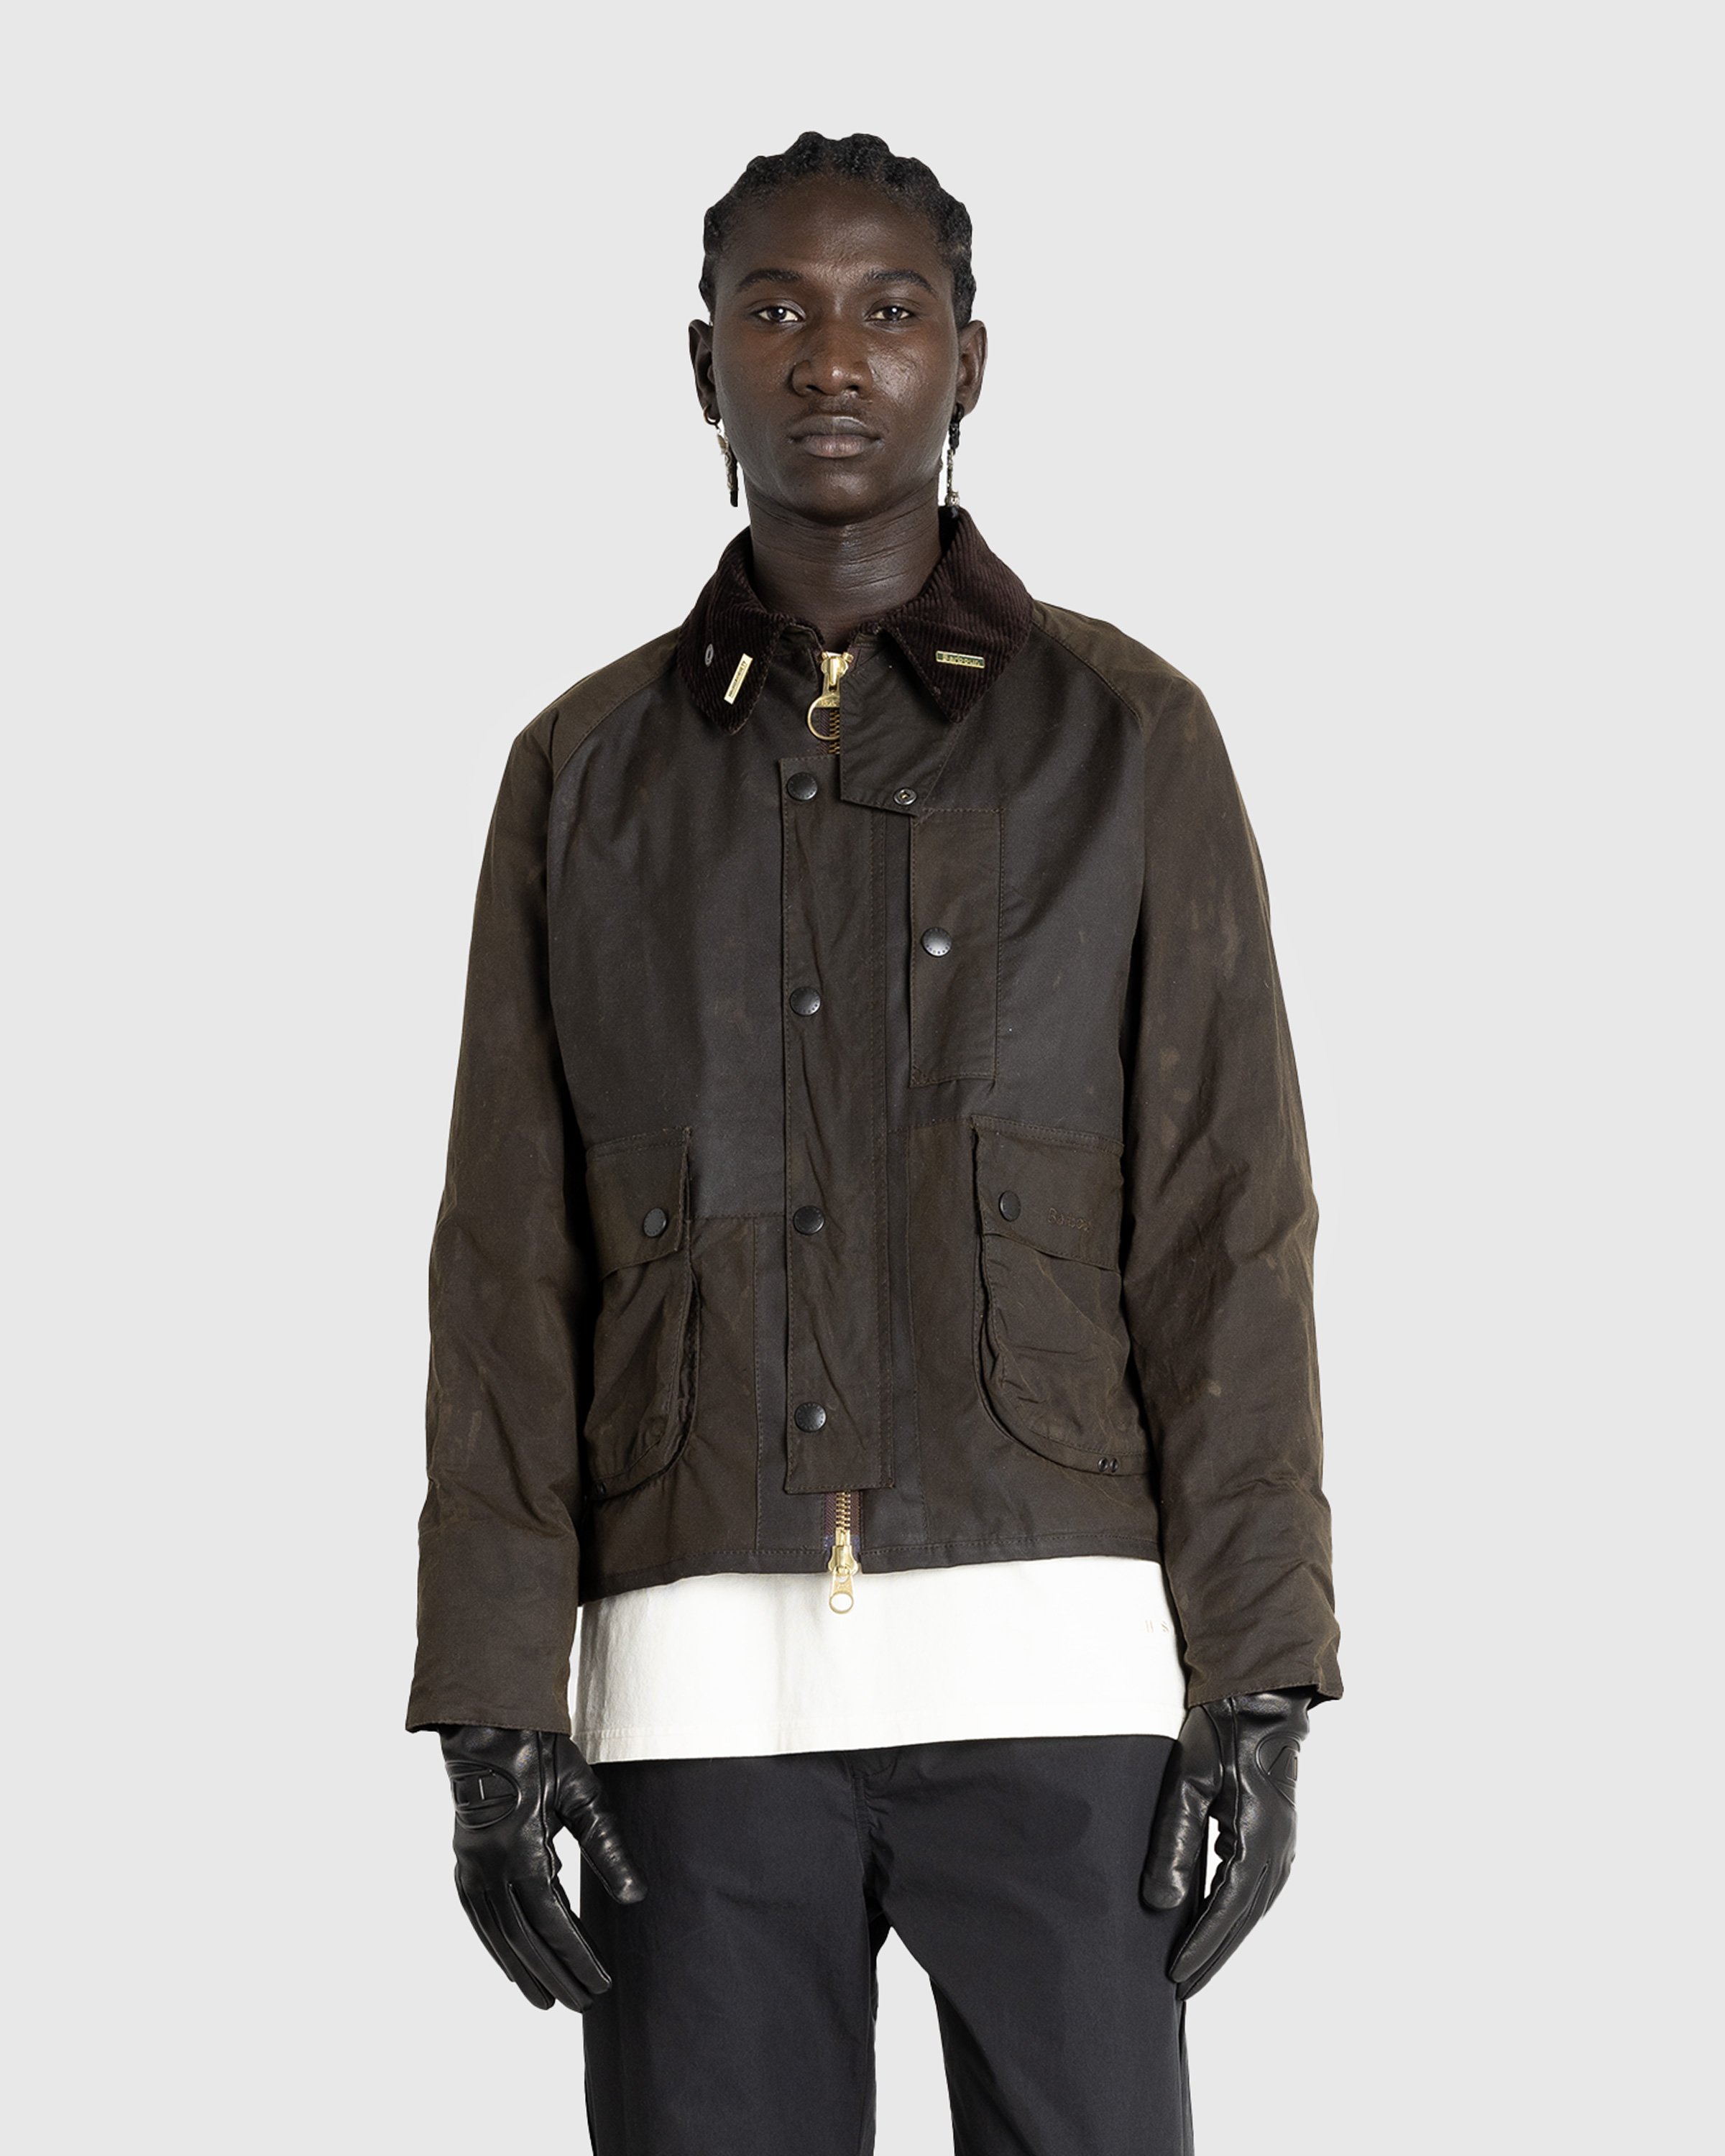 Barbour x Highsnobiety - Re-Loved Cropped Bedale Jacket 1 - 32 - Grey-Black - Clothing - Grey - Image 5